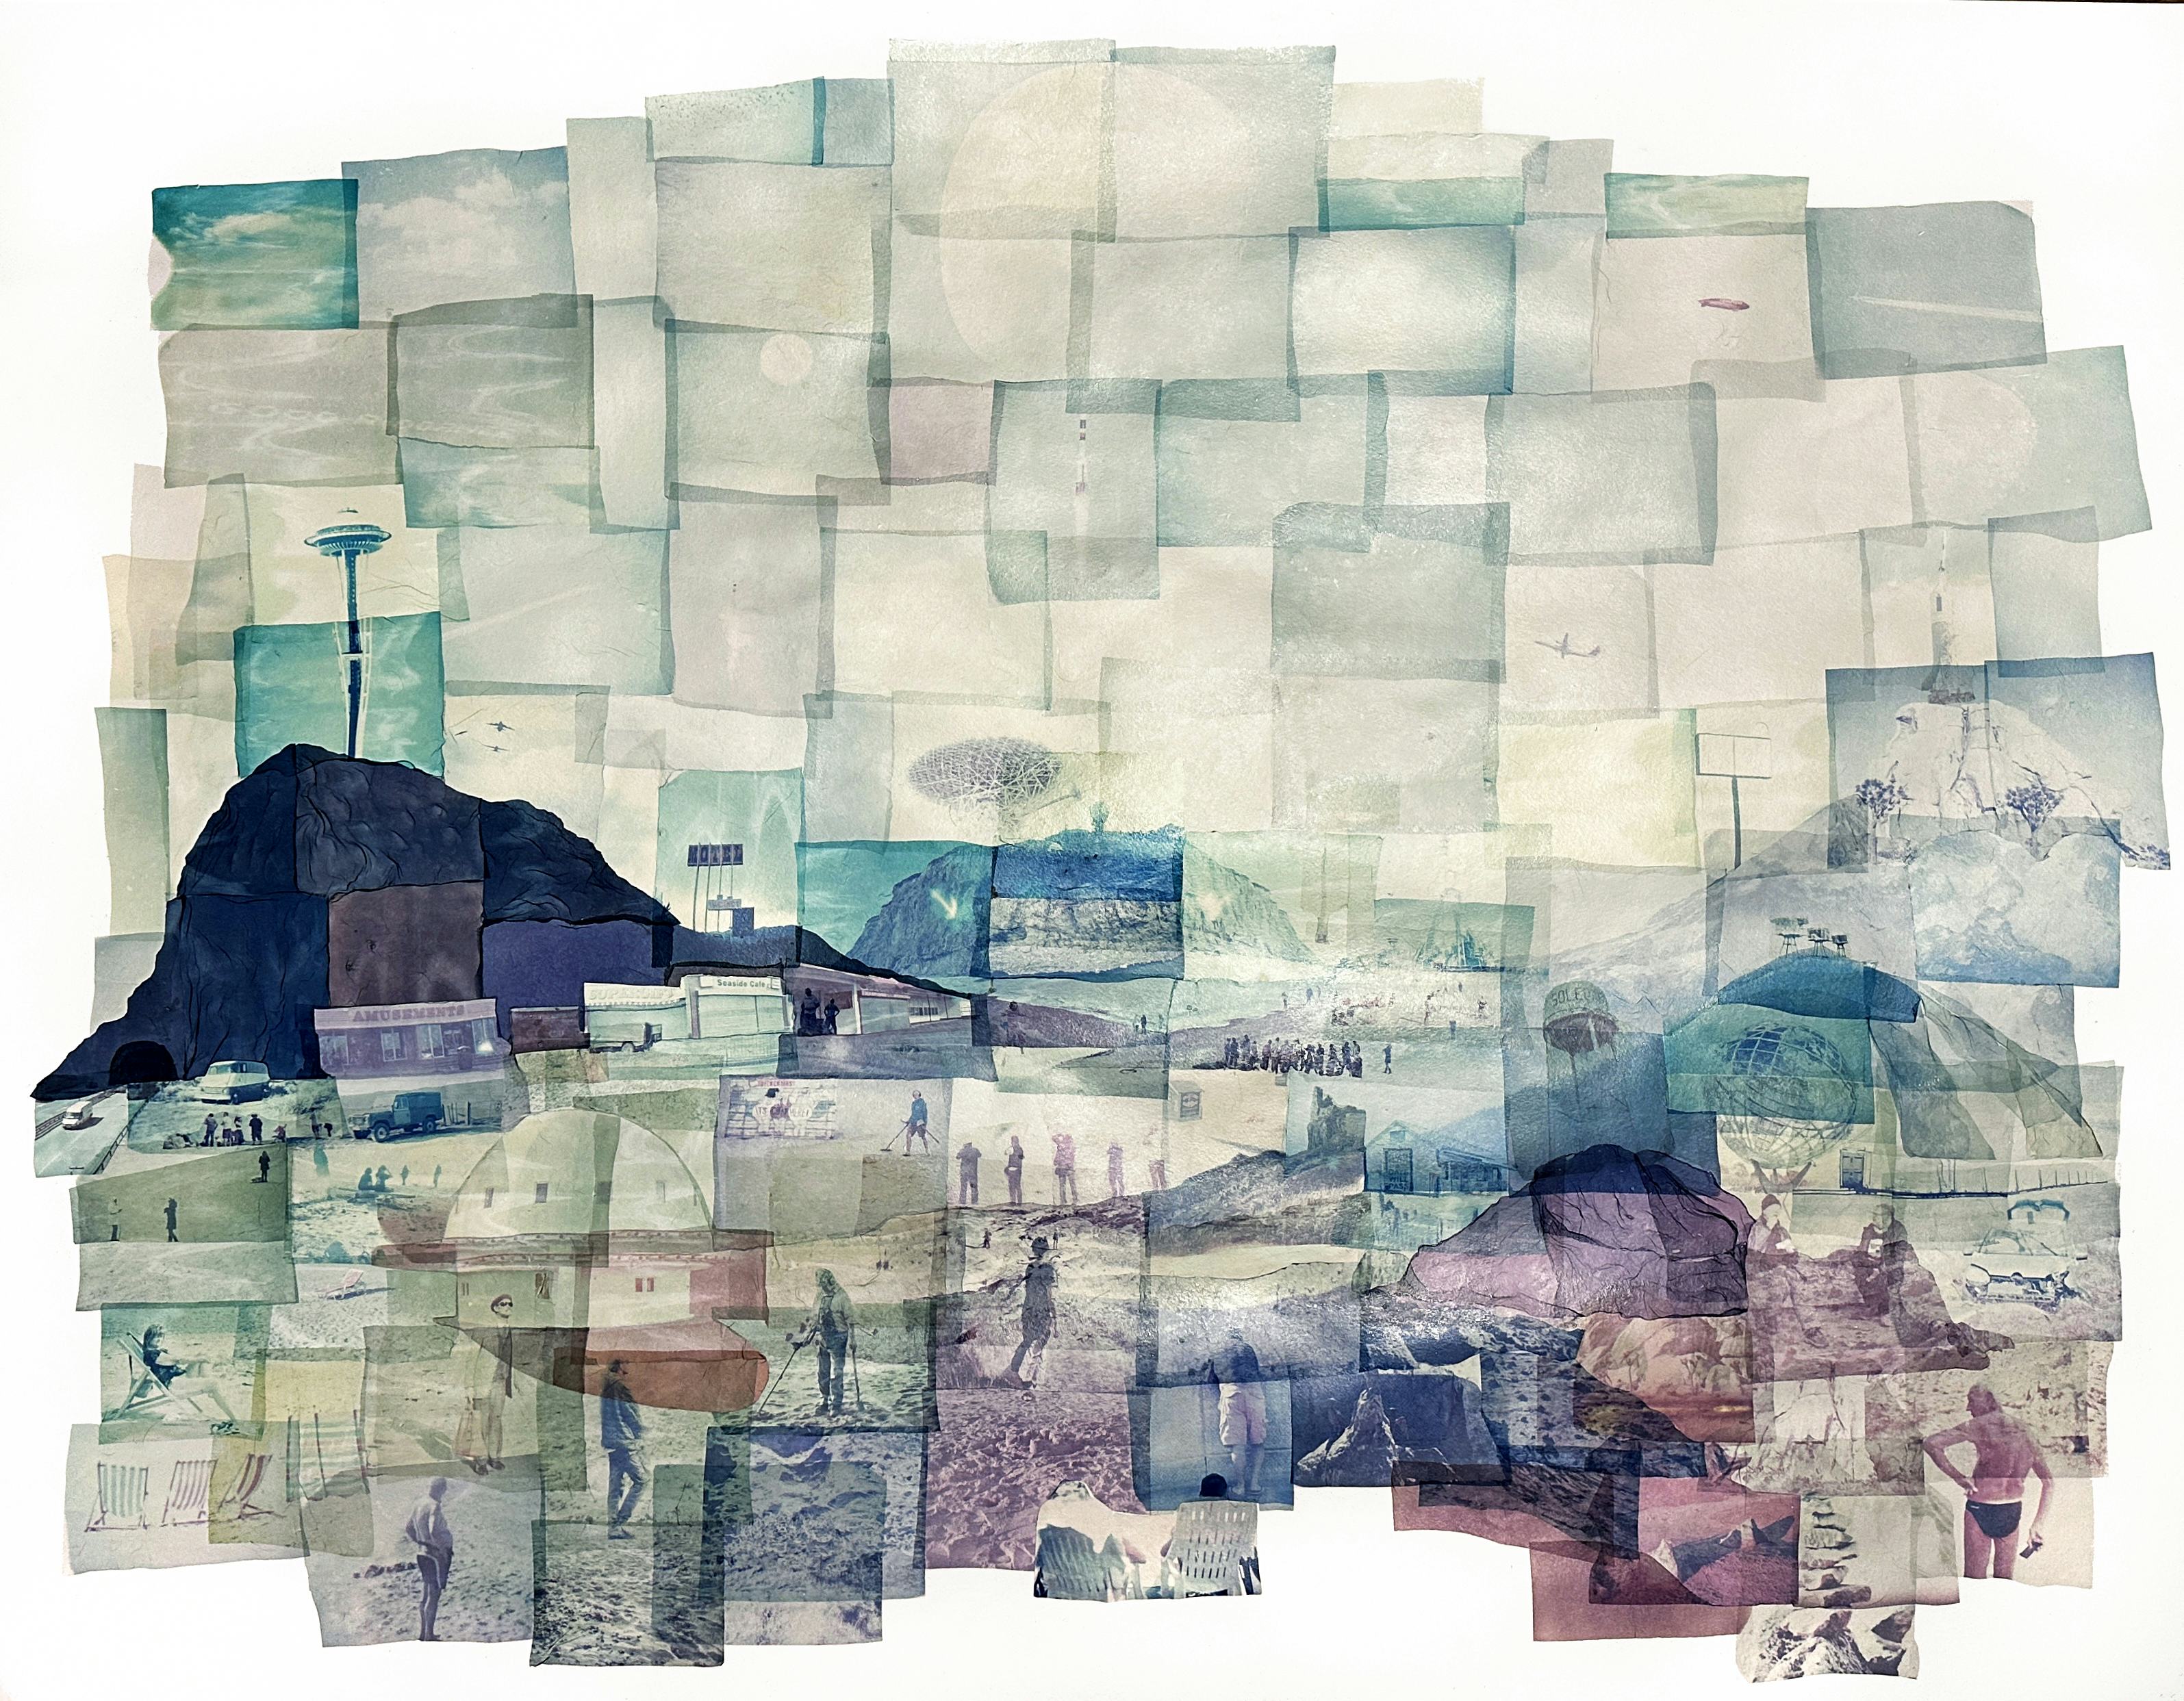 Large-scale Polaroid emulsion lift photomontage’s, creating fantastical locations that span time and geography